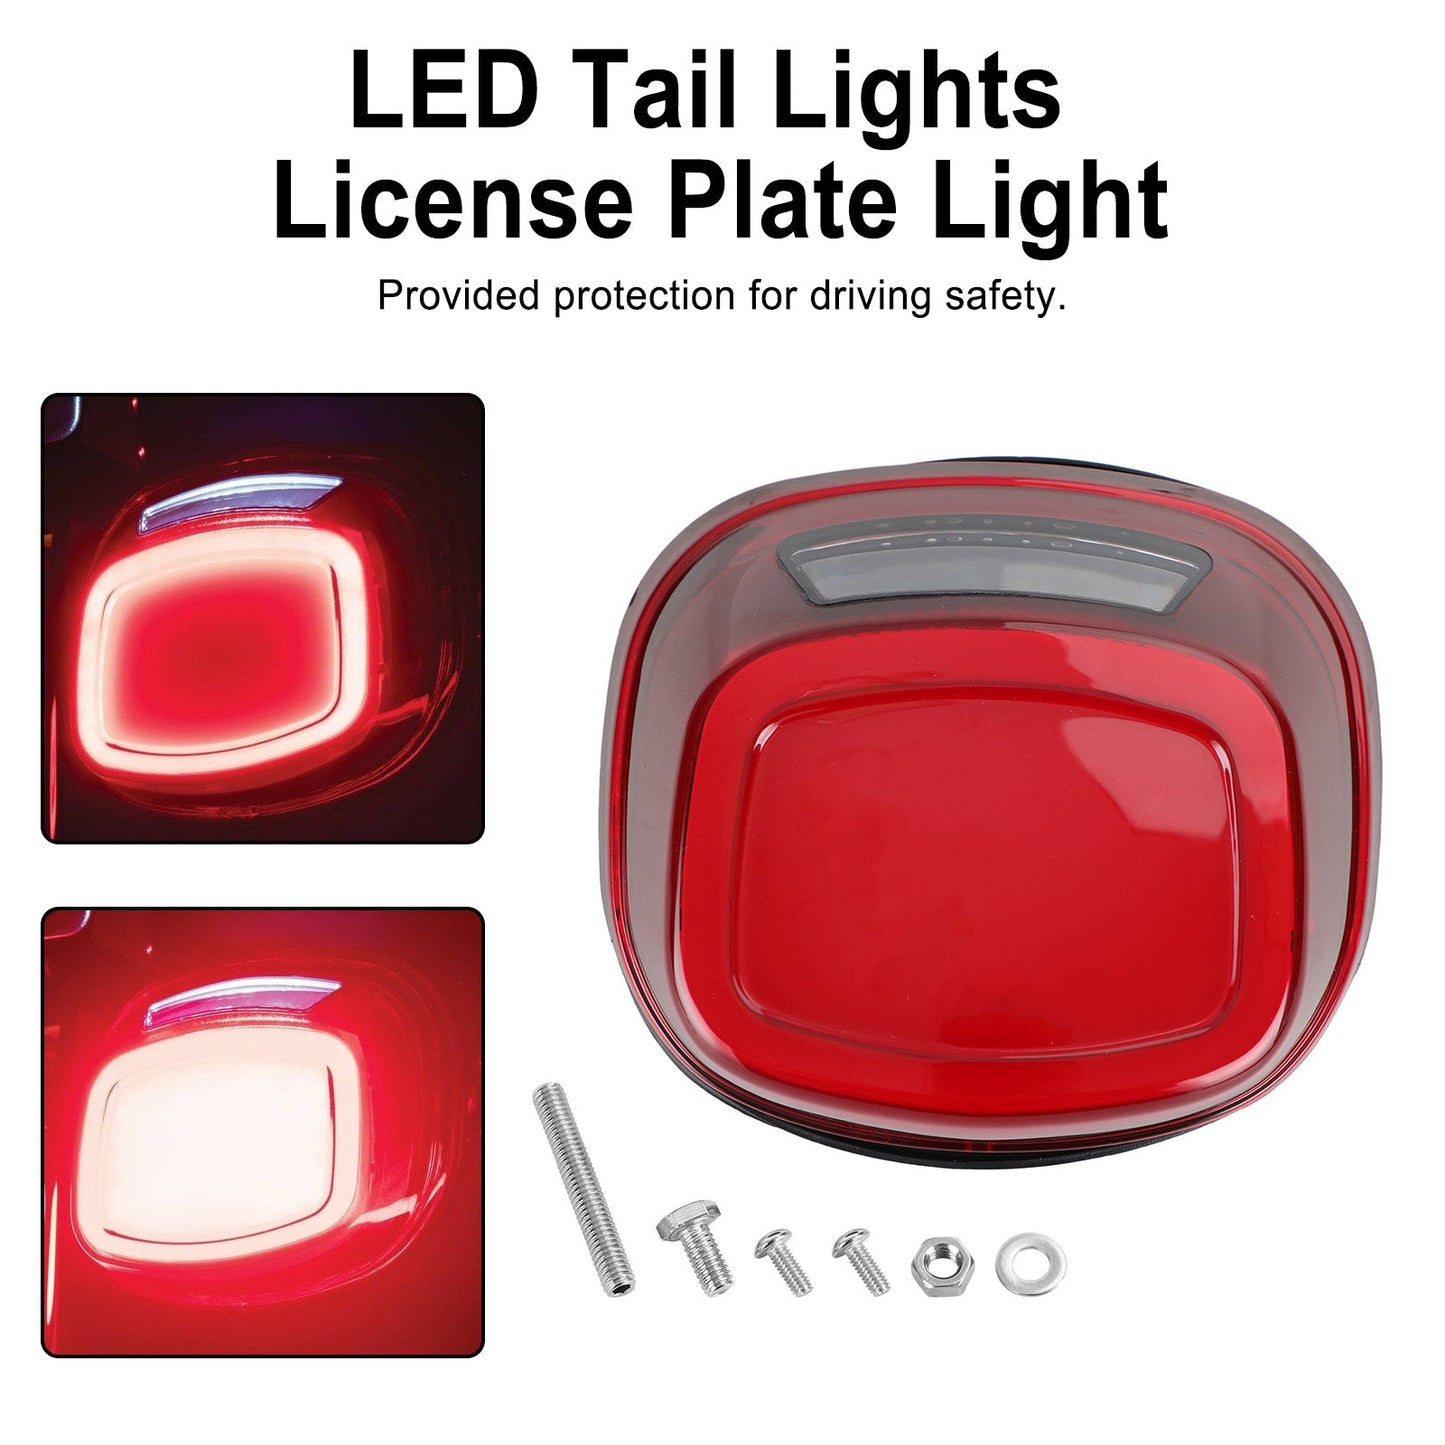 LED Tail Lights License Plate Light For Touring Softail Dyna Sportster 99-Up Gray